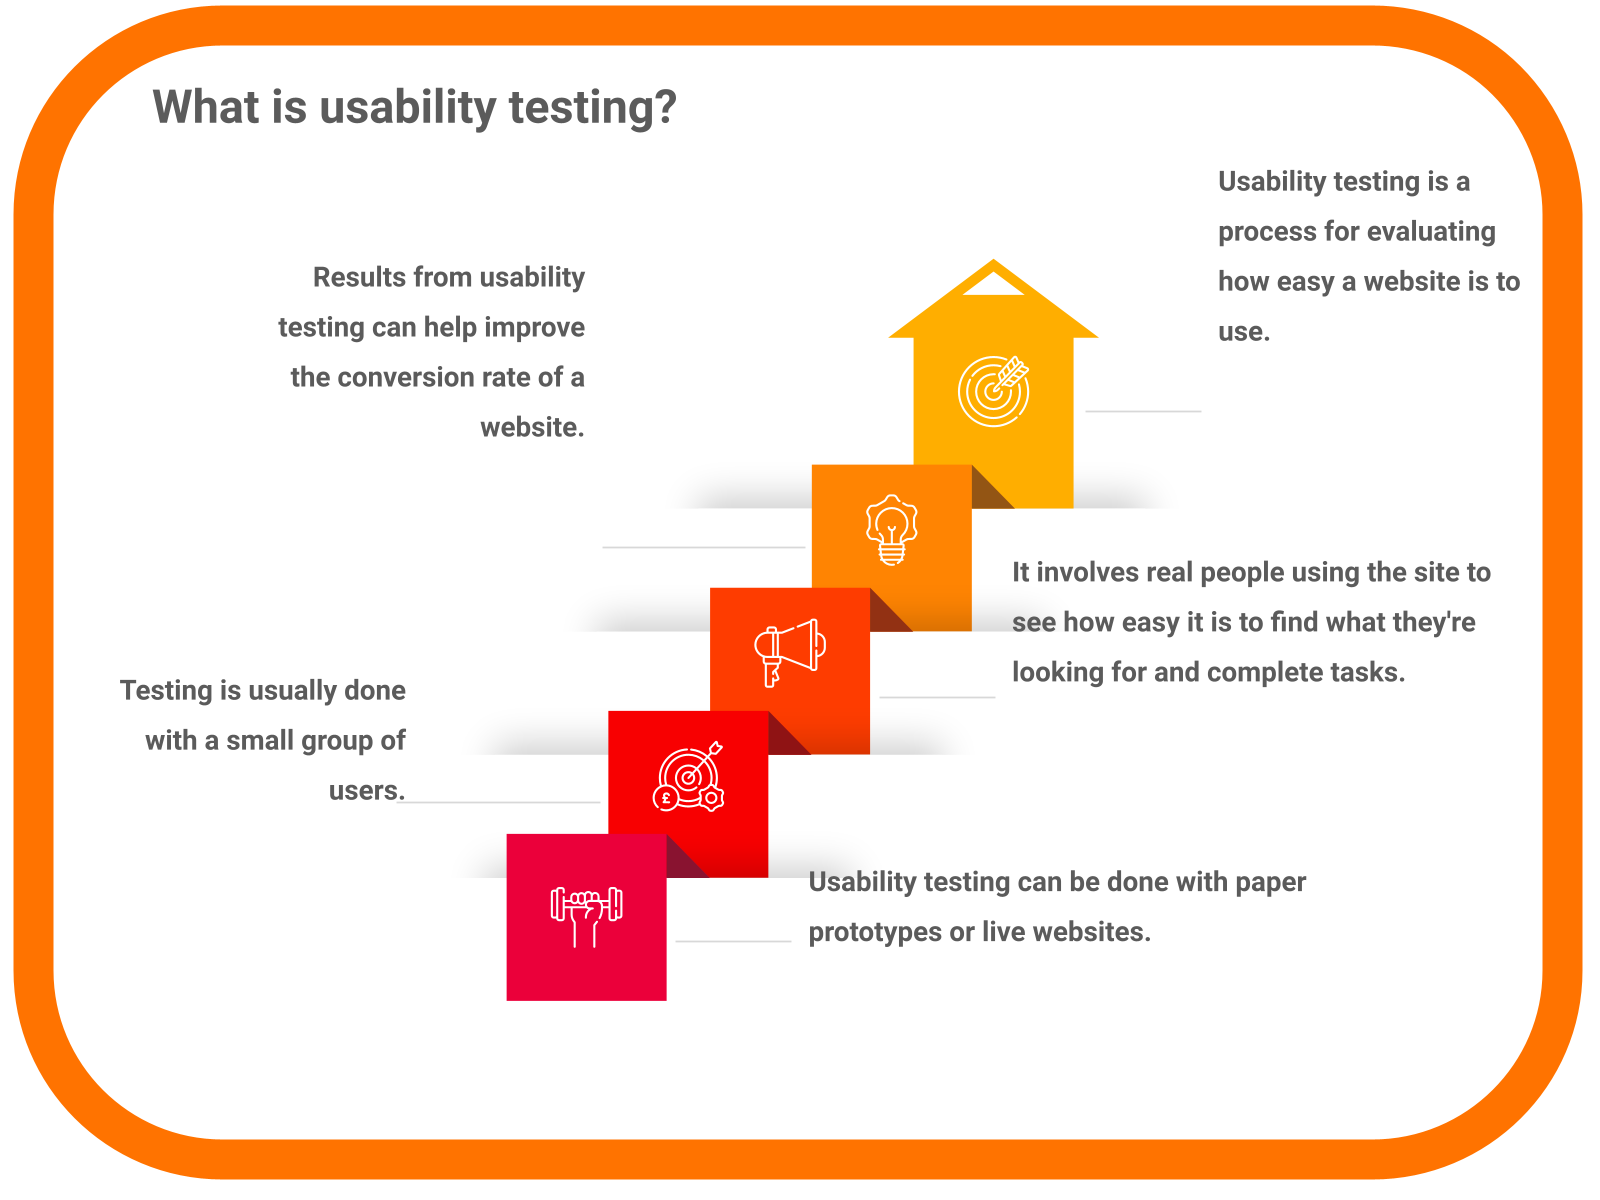 What is usability testing?